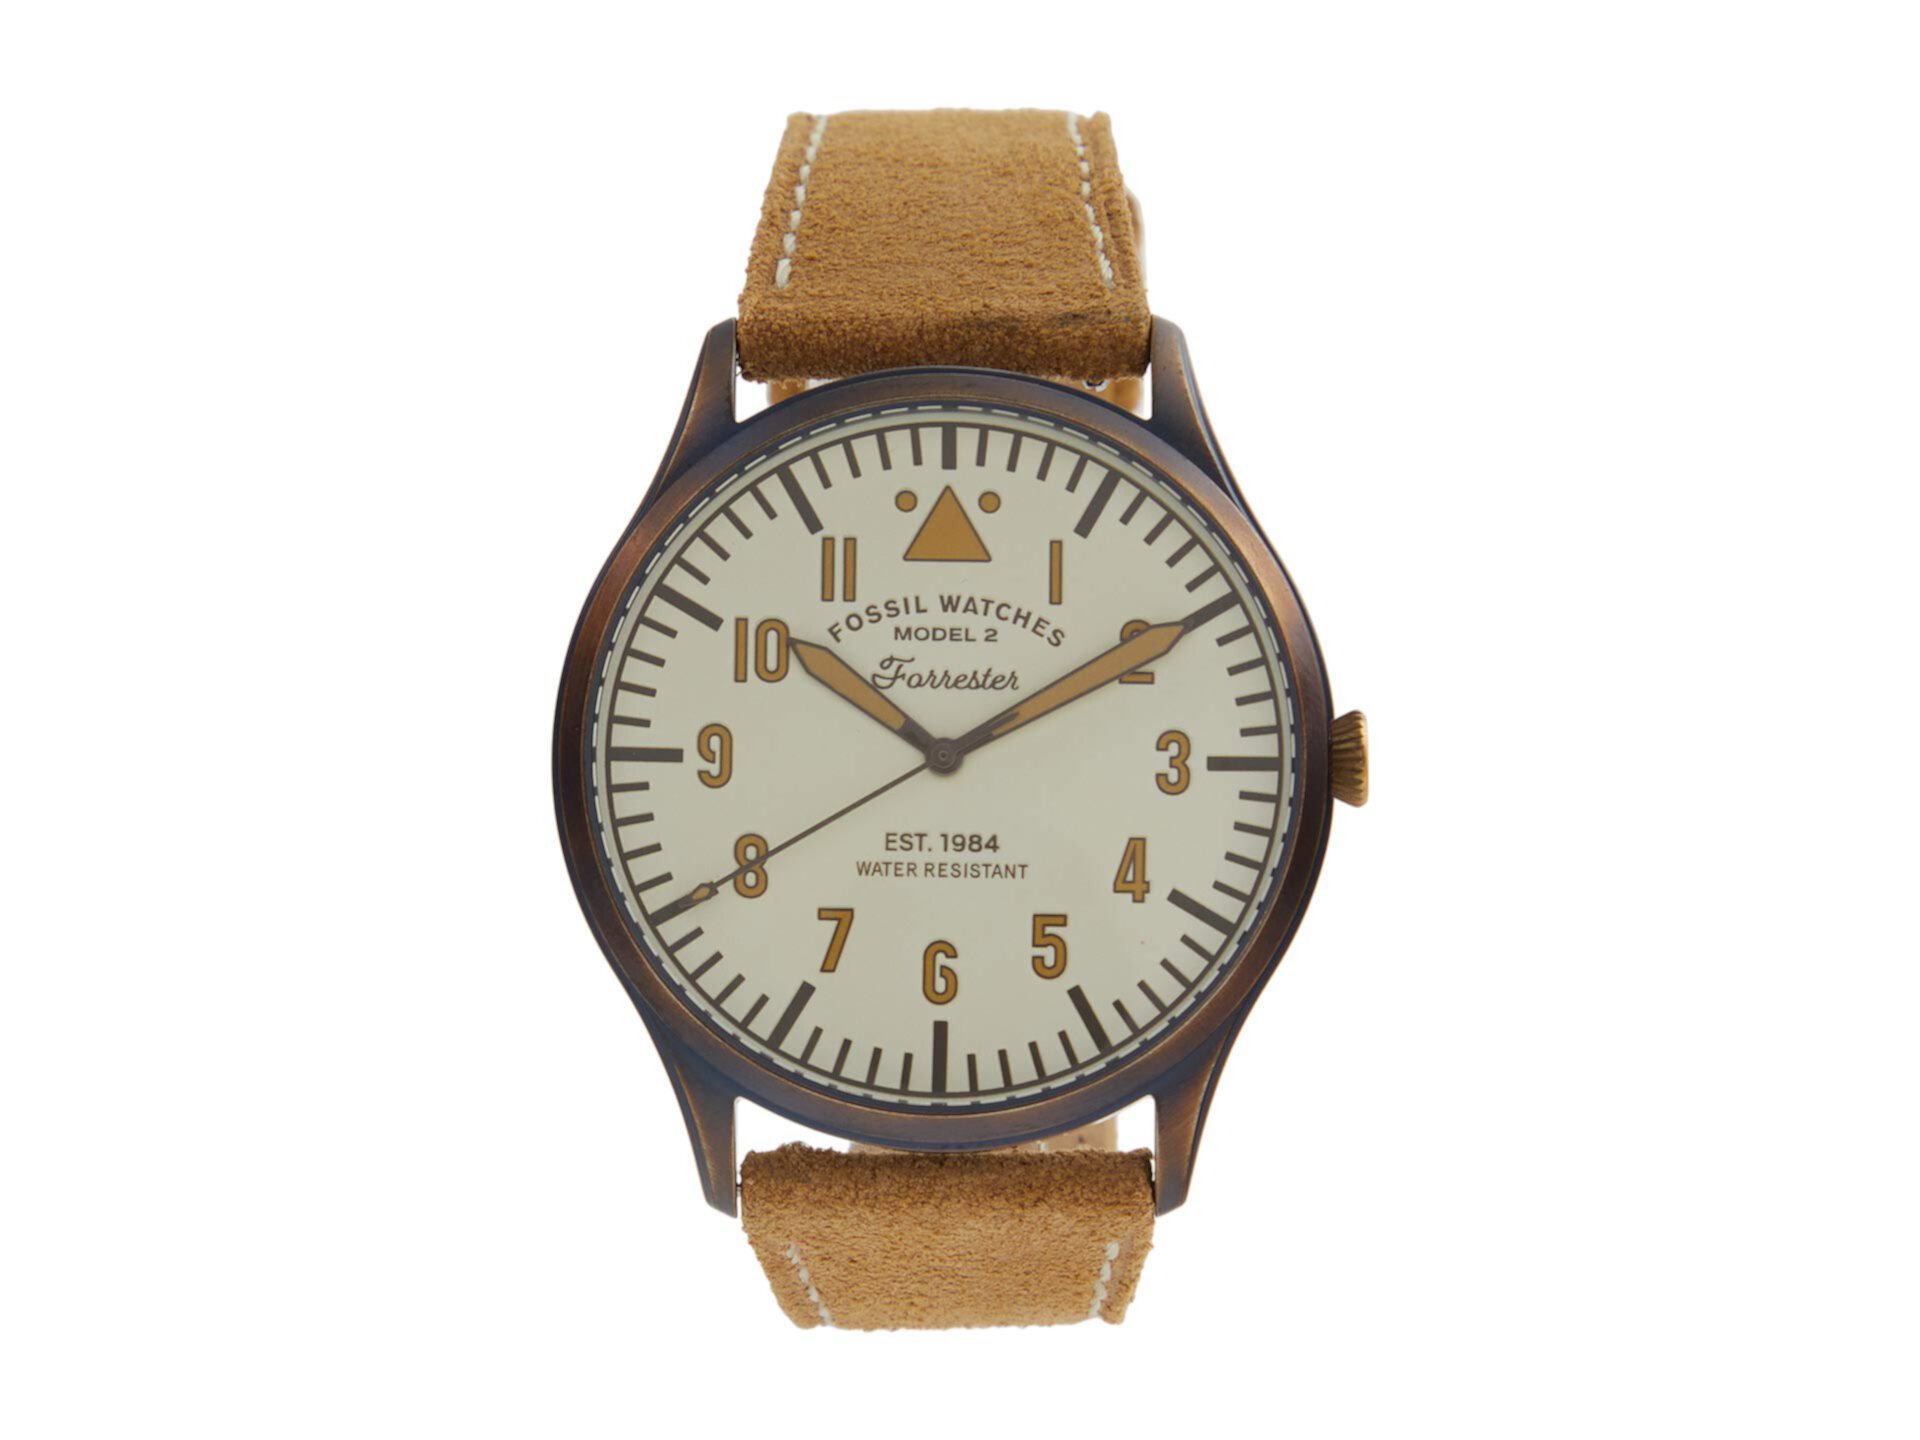 Forrester Automatic Watch - LE1102 Fossil